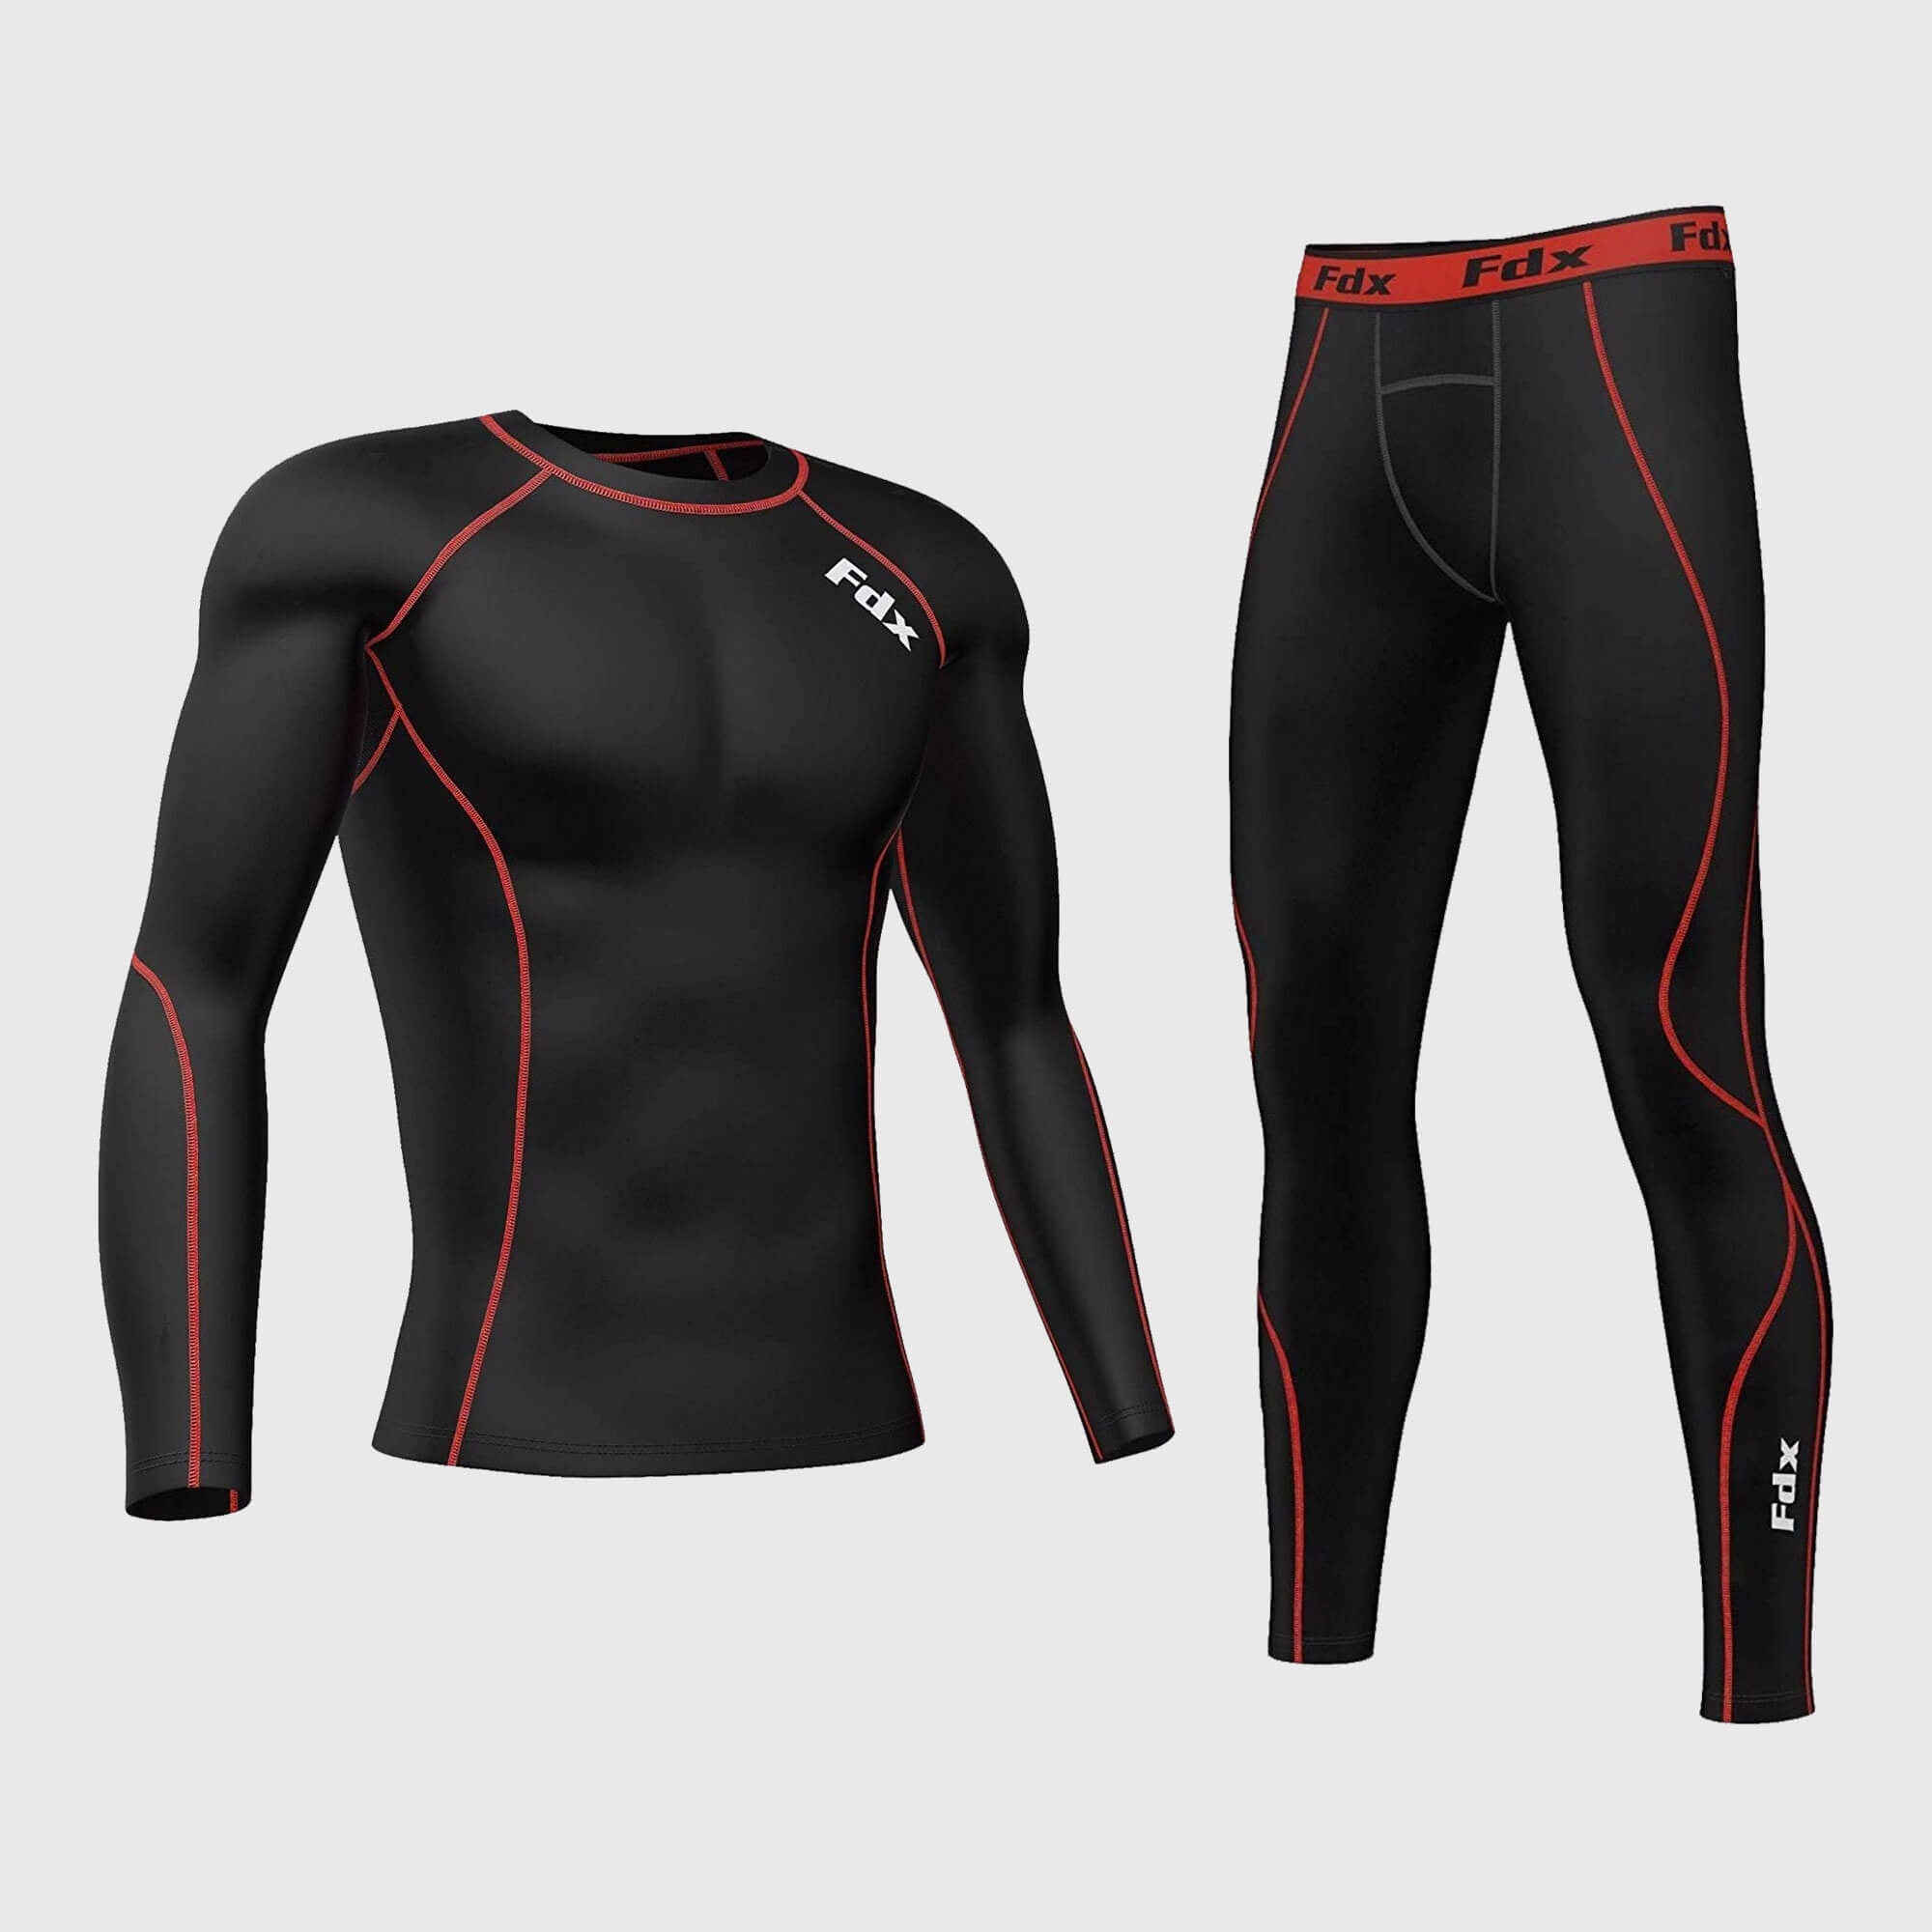 Fdx Men's Black & Red Long Sleeve Compression Top & Compression Tights Base Layer Gym Training Jogging Yoga Fitness Body Wear - Blitz